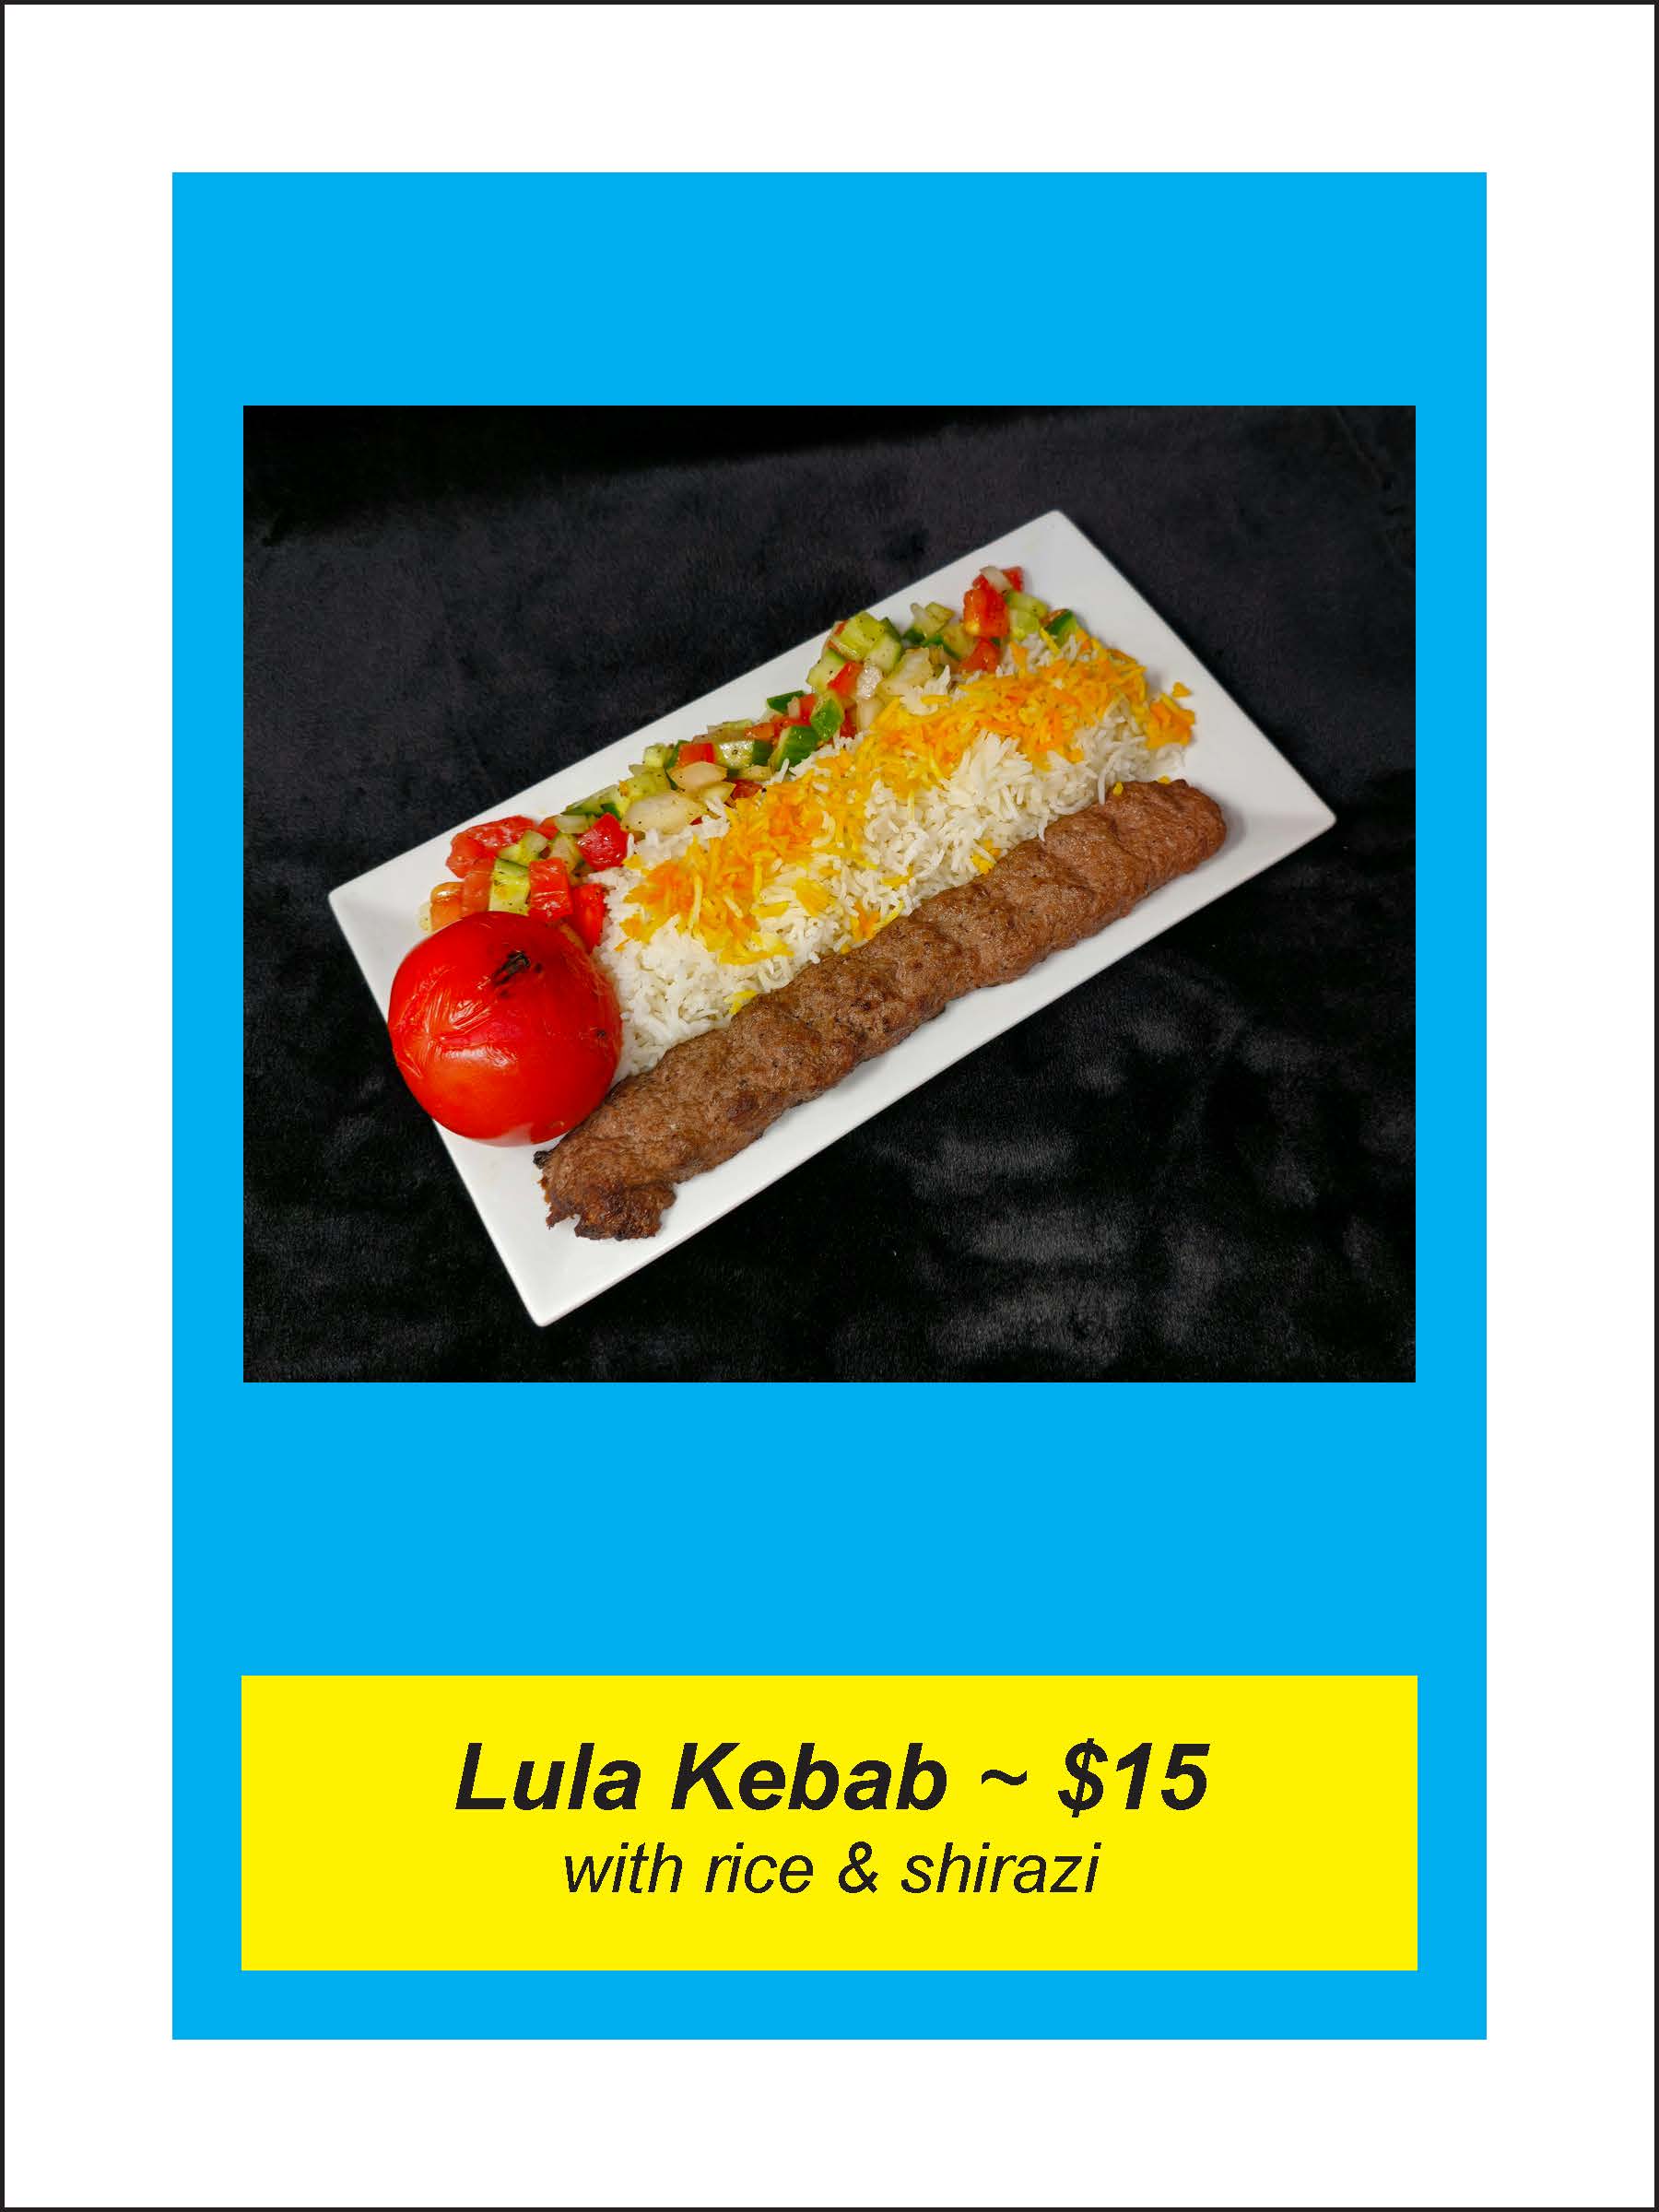 A plate of lula kebab with rice and shirazi salad is shown, priced at $15 as indicated on the label below the image.